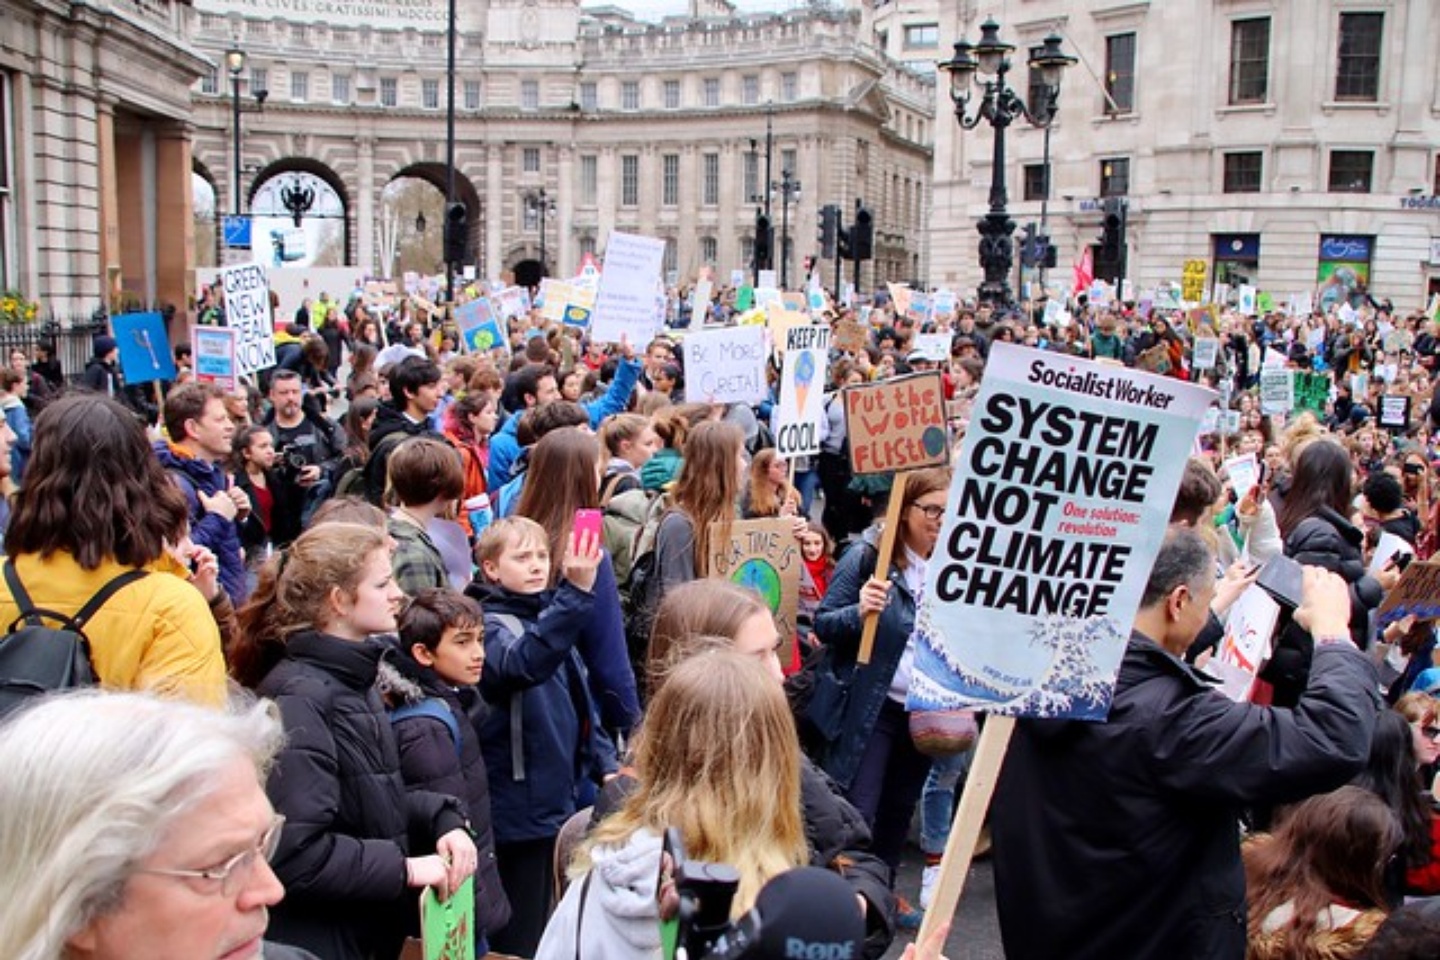 Young climate activists around the world are calling for system change in a world beset by climate change and widening inequality. Image: Roy/Flickr , CC BY-NC 2.0